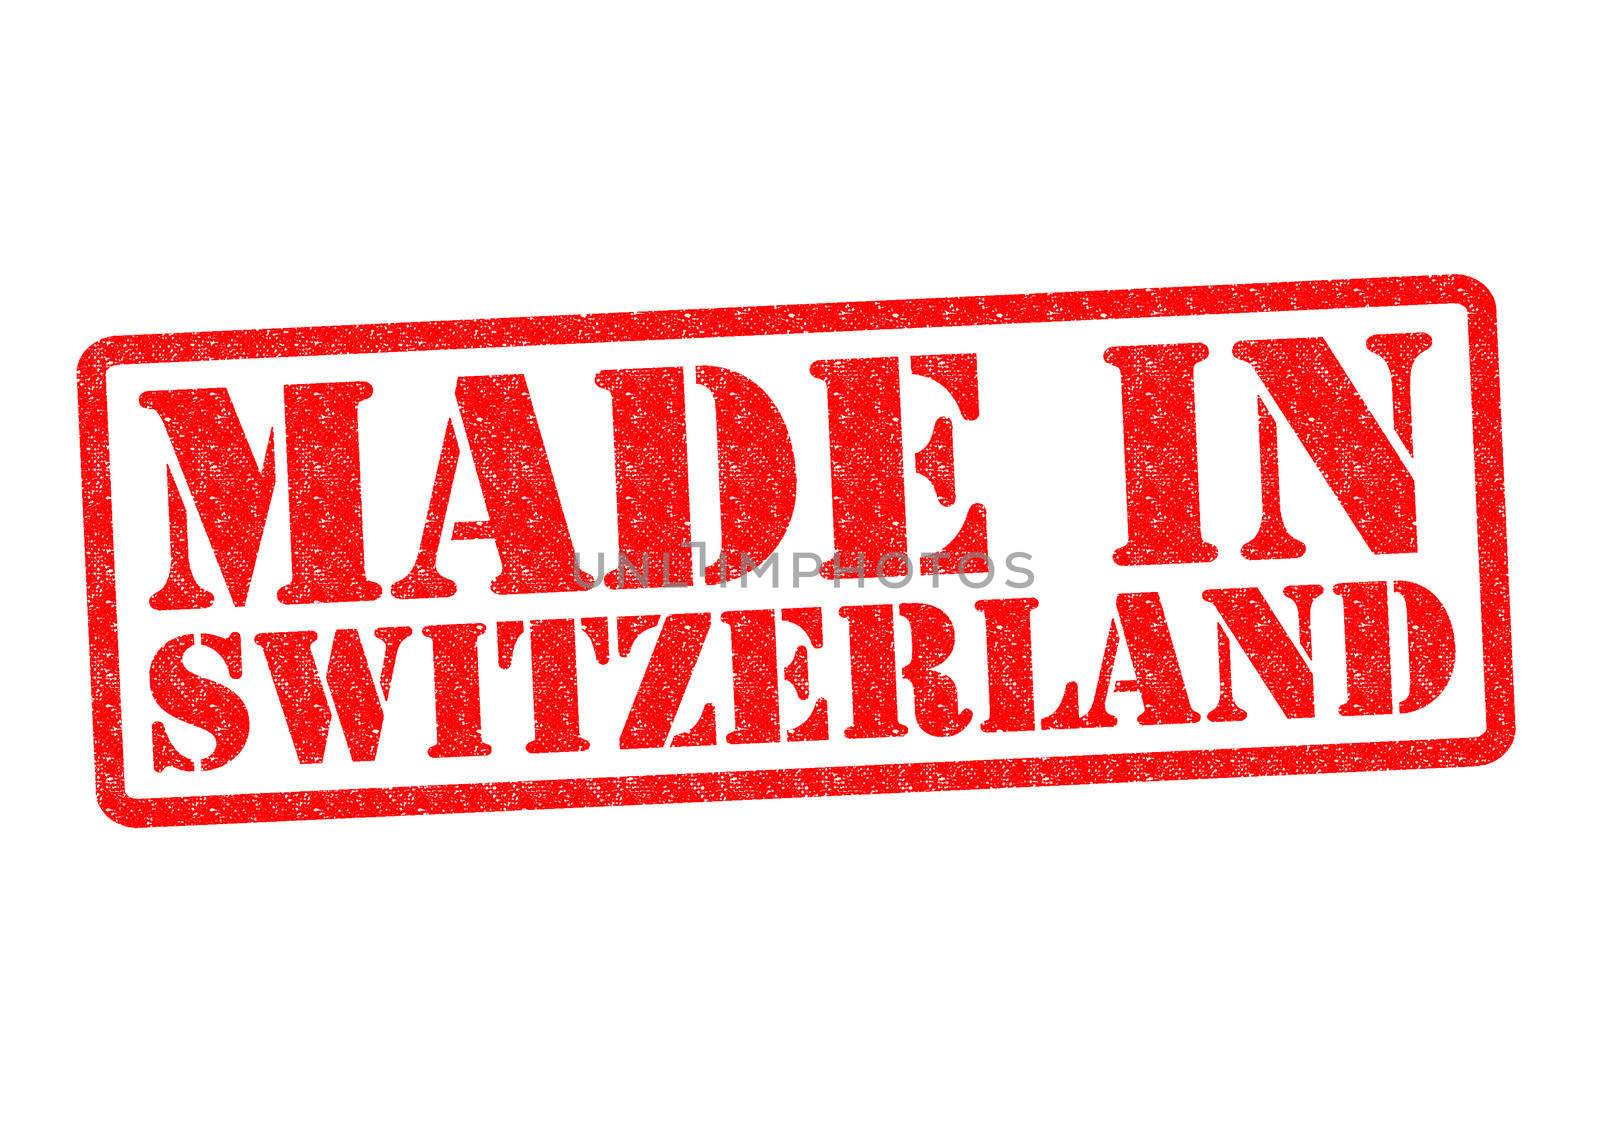 MADE IN SWITZERLAND Rubber Stamp over a white background.